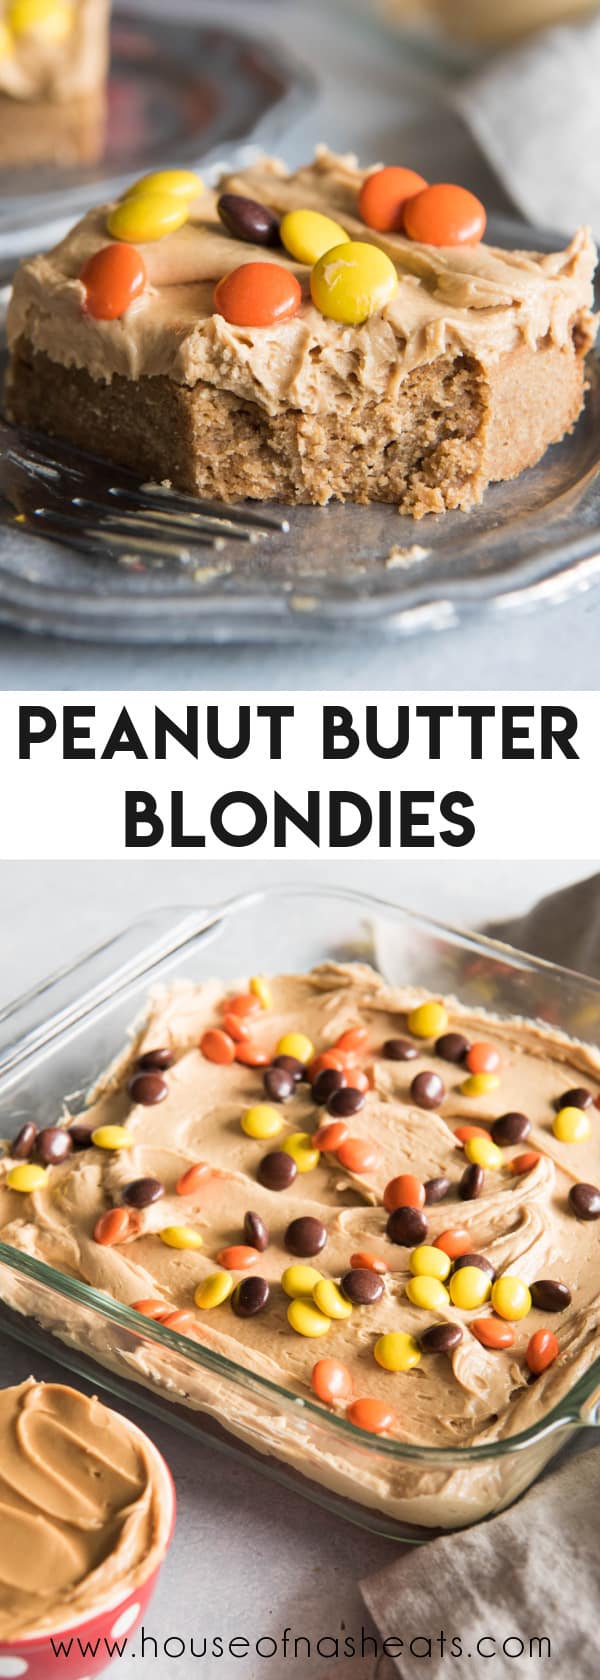 A collage of images of frosted peanut butter blondies with text overlay.